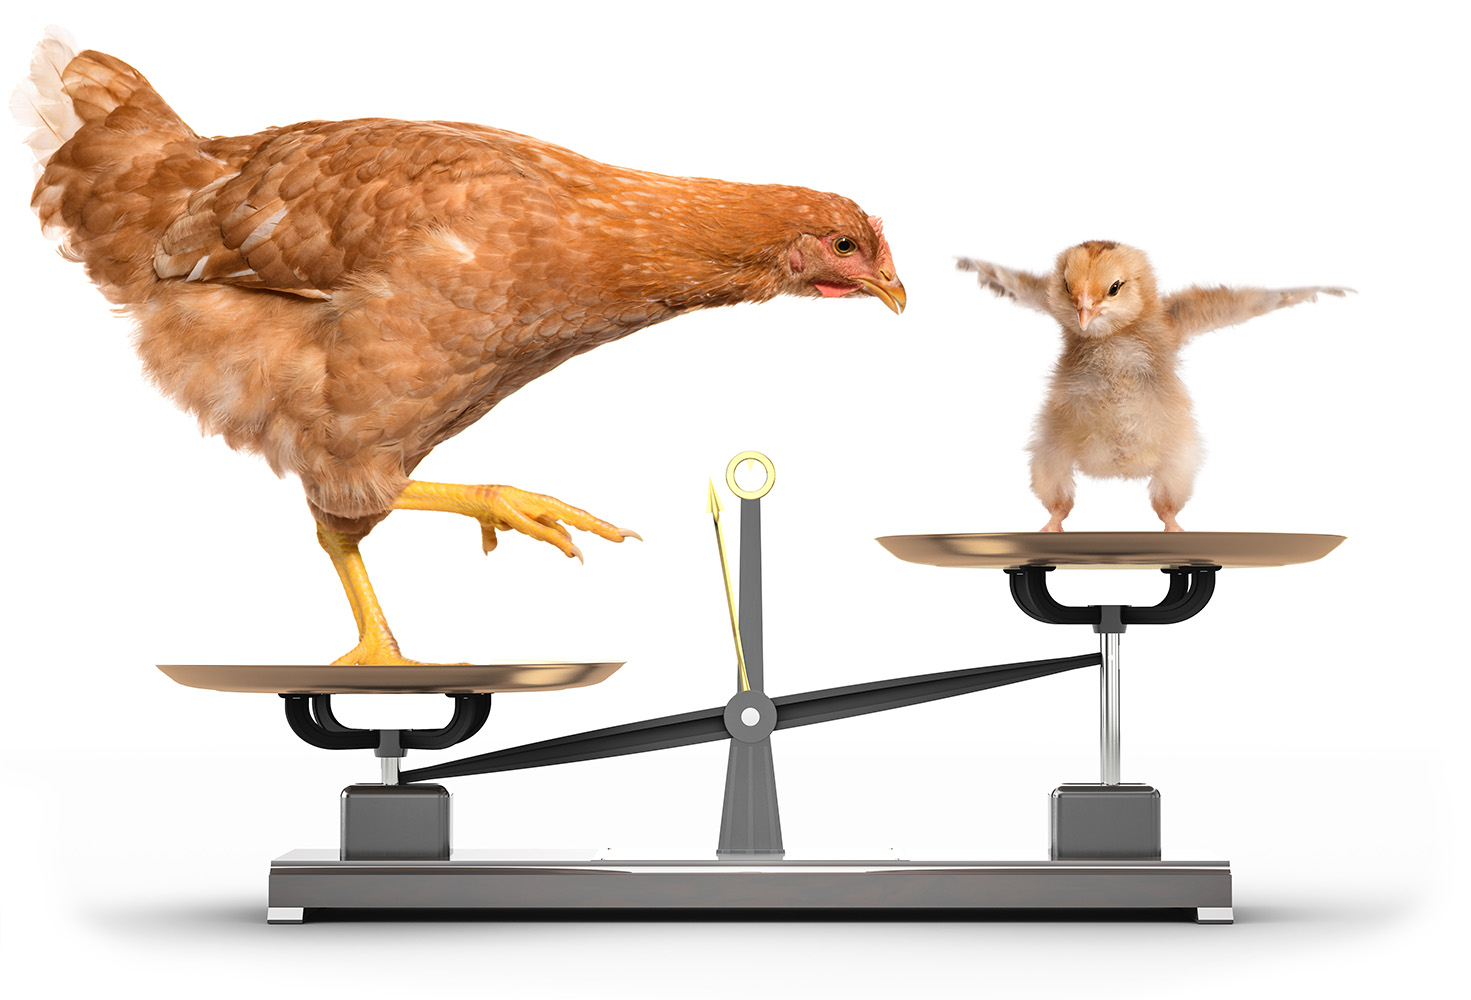 Broiler chickens on scales fully grown bird and chick.jpg